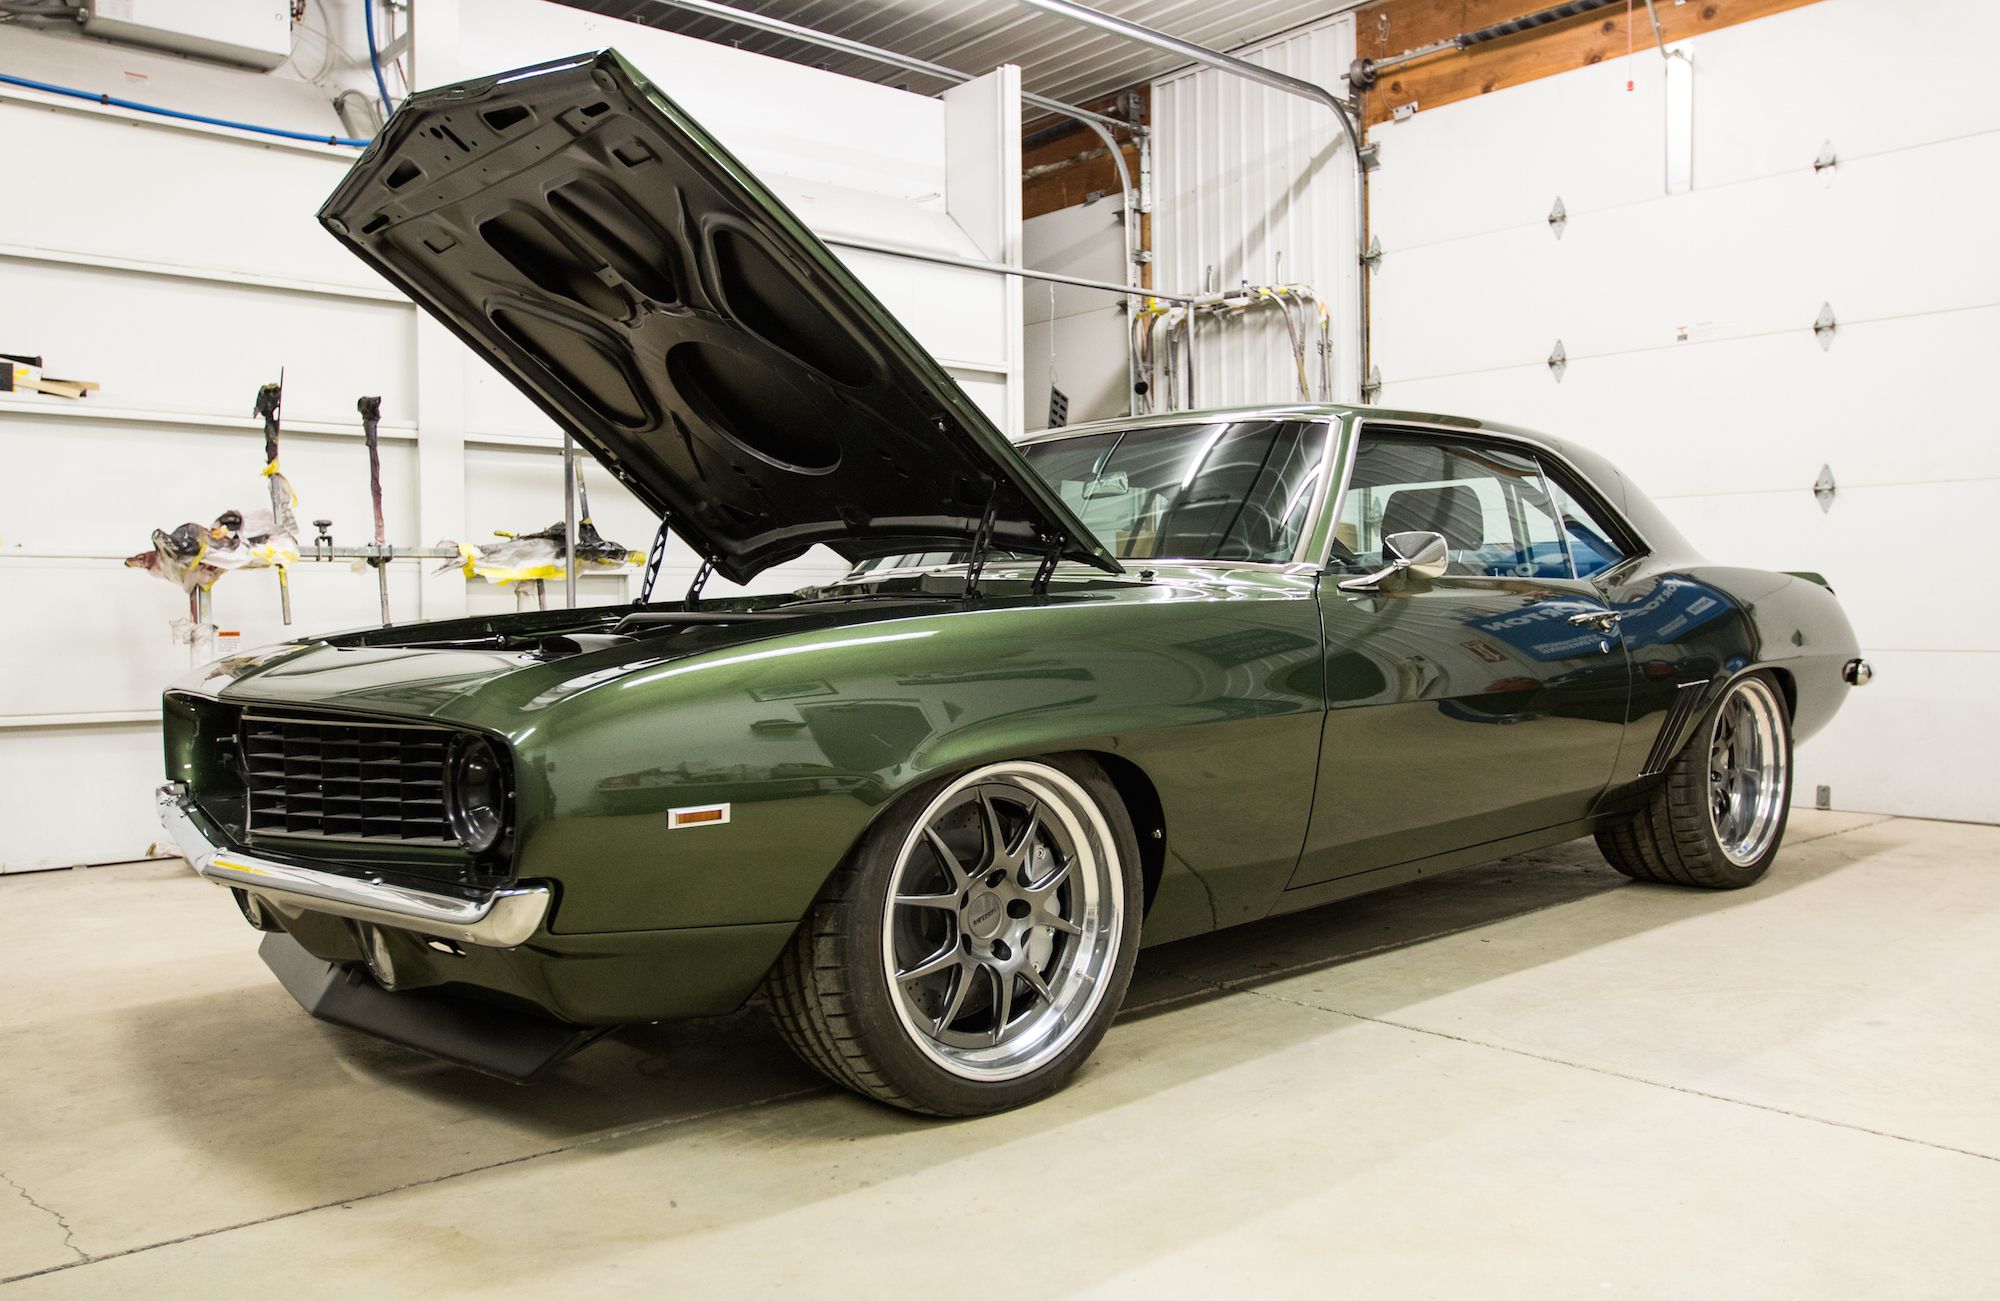 feeling green with envy yet chris incredible protouring camaro was